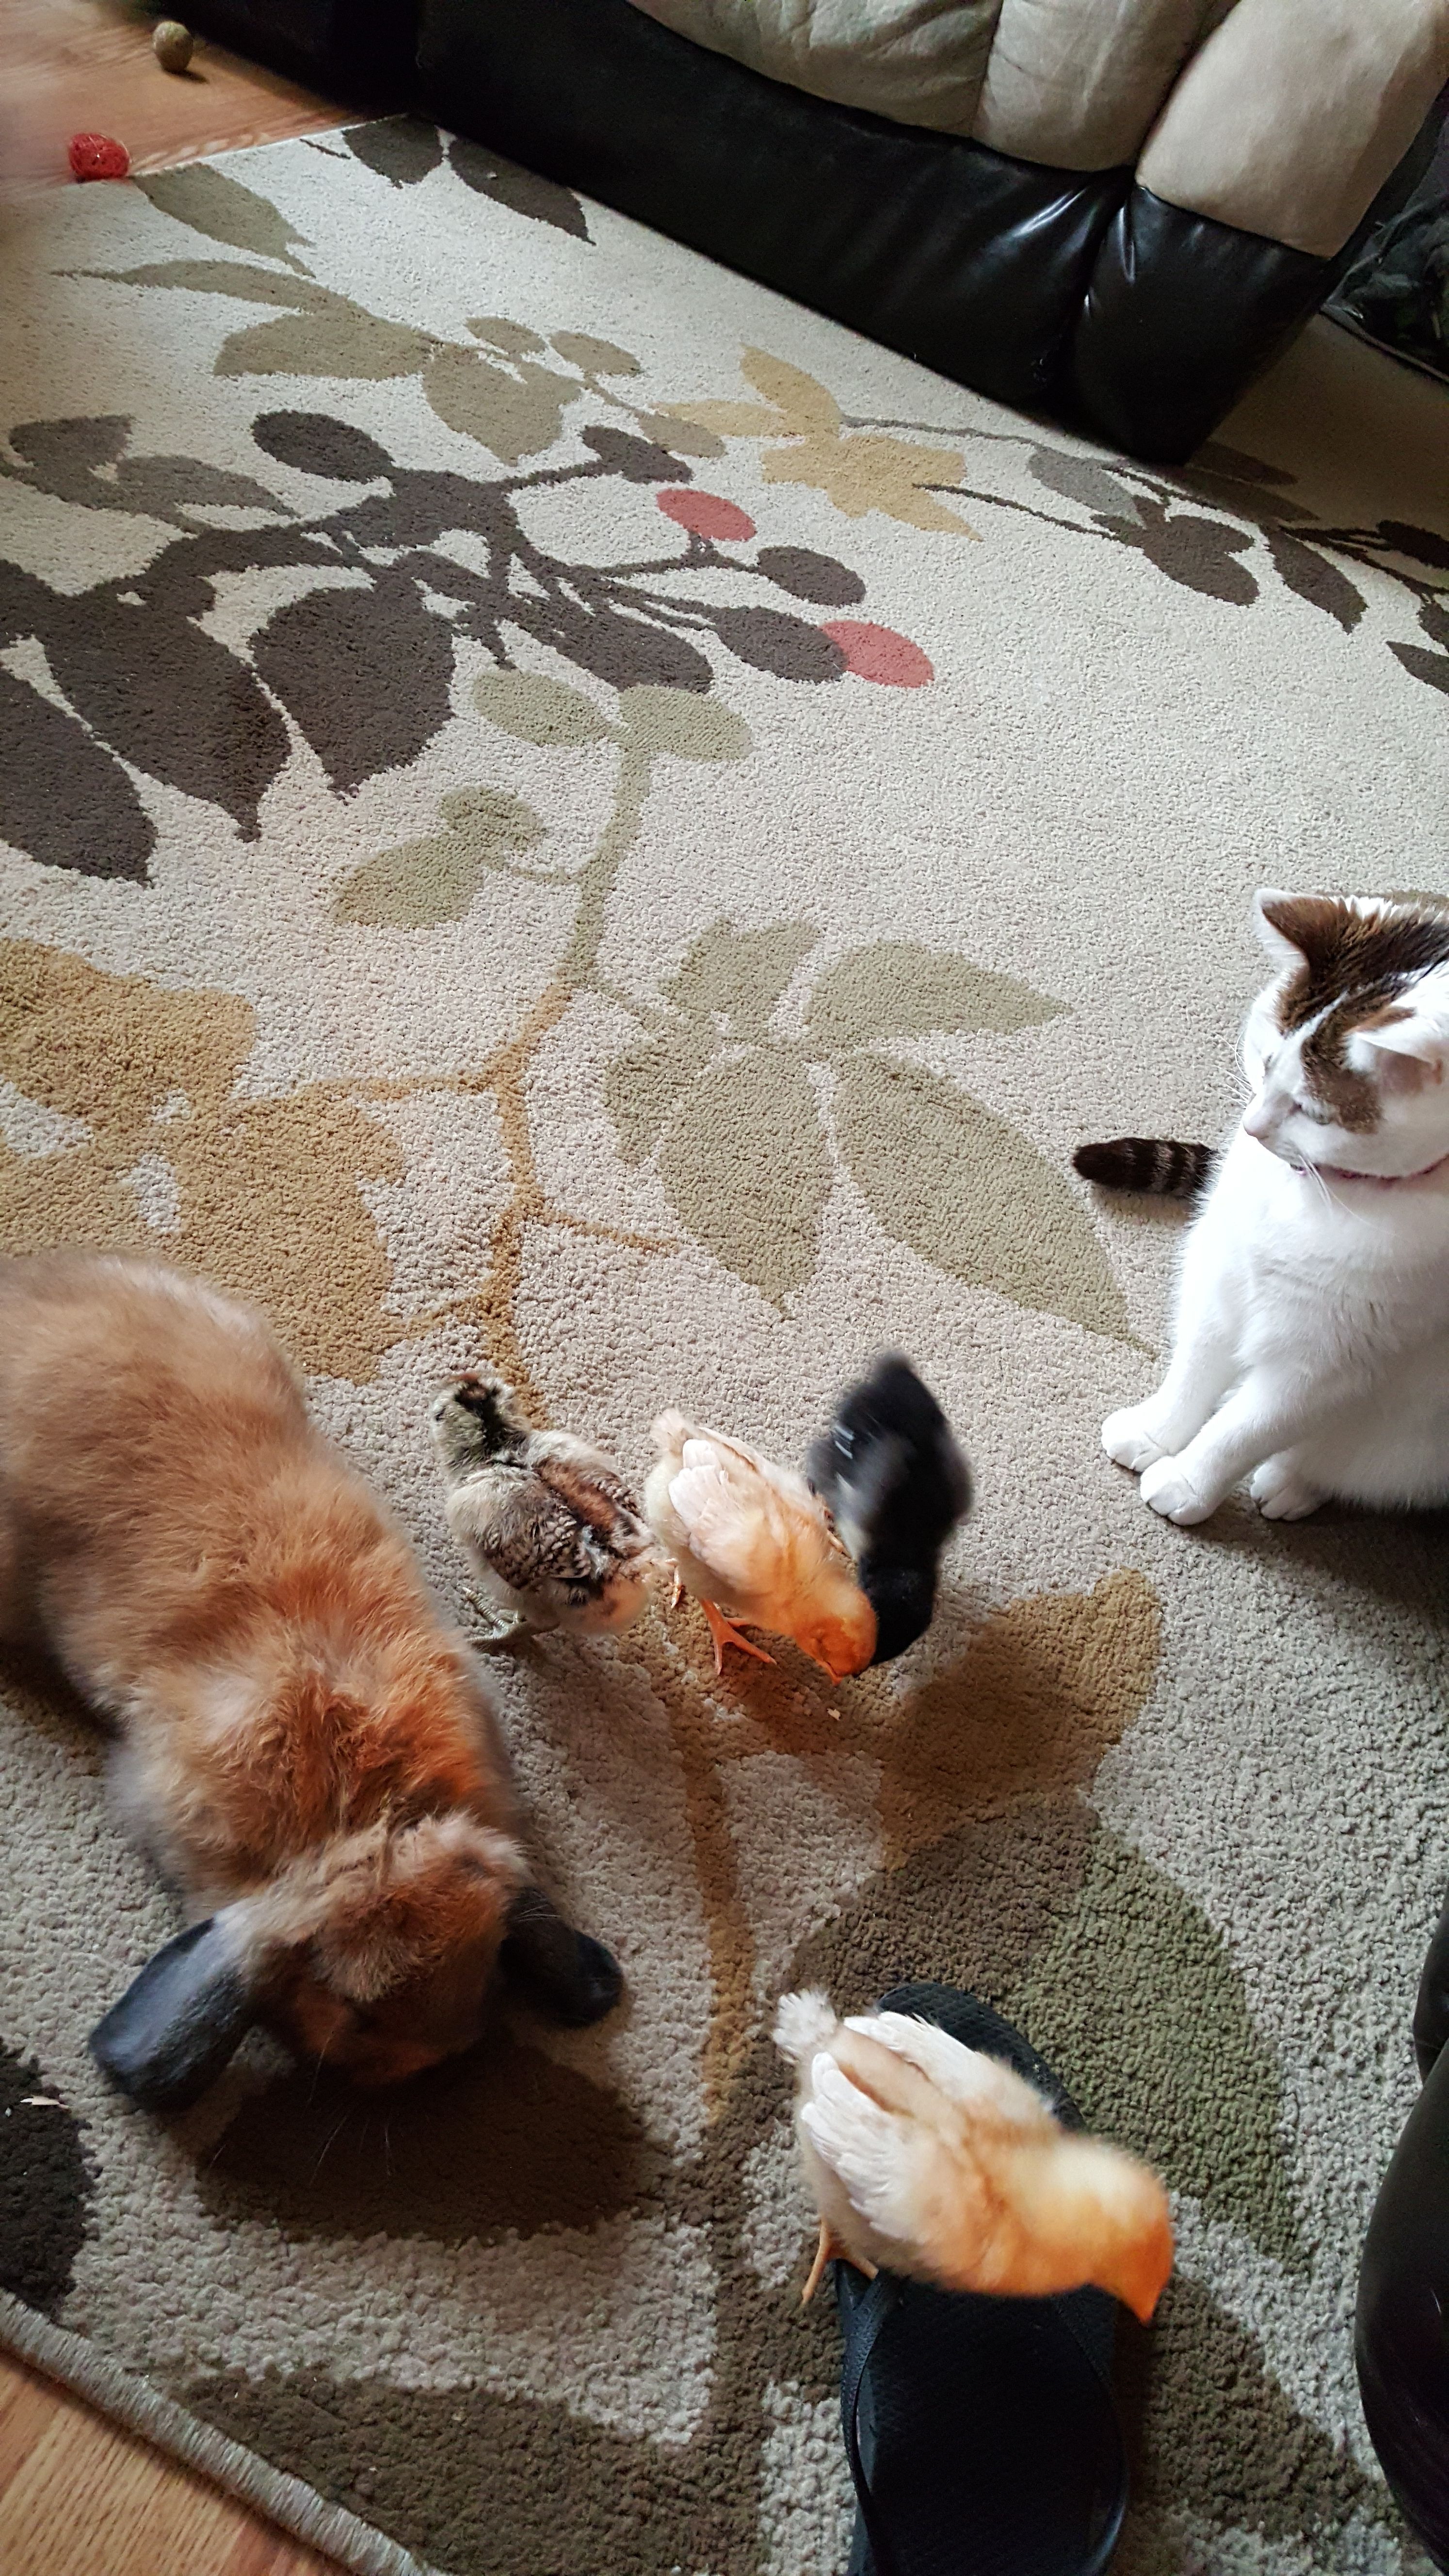 My girls hanging out, with Meatball my sons mini lop and our cat Karma. Don't worry Dime is close by.